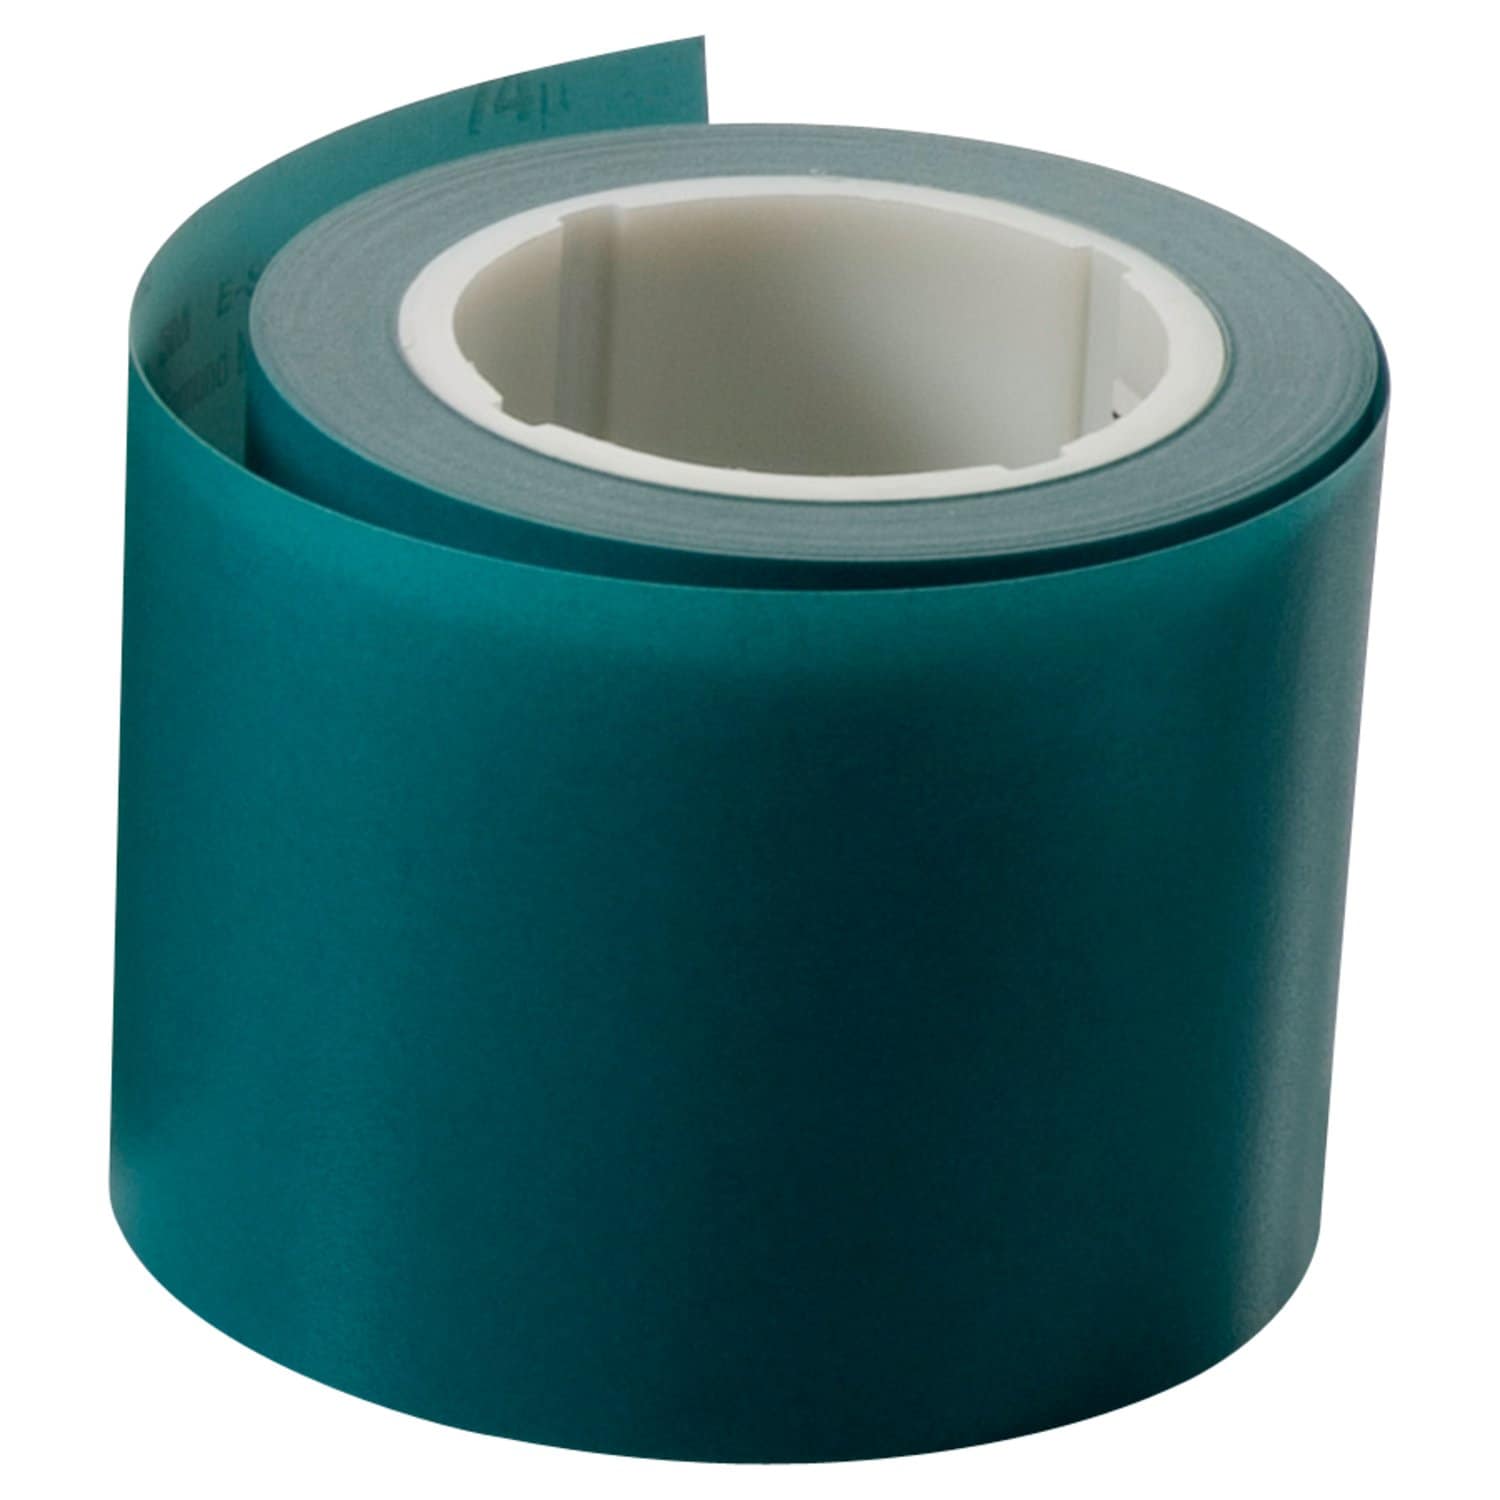 7010307757 - 3M Microfinishing Film Roll 373L, 30 Mic 5MIL, 0.669 in x 75 ft x 1.417 in (16.99mmx22.75m), ASI, End Roll Mark Red